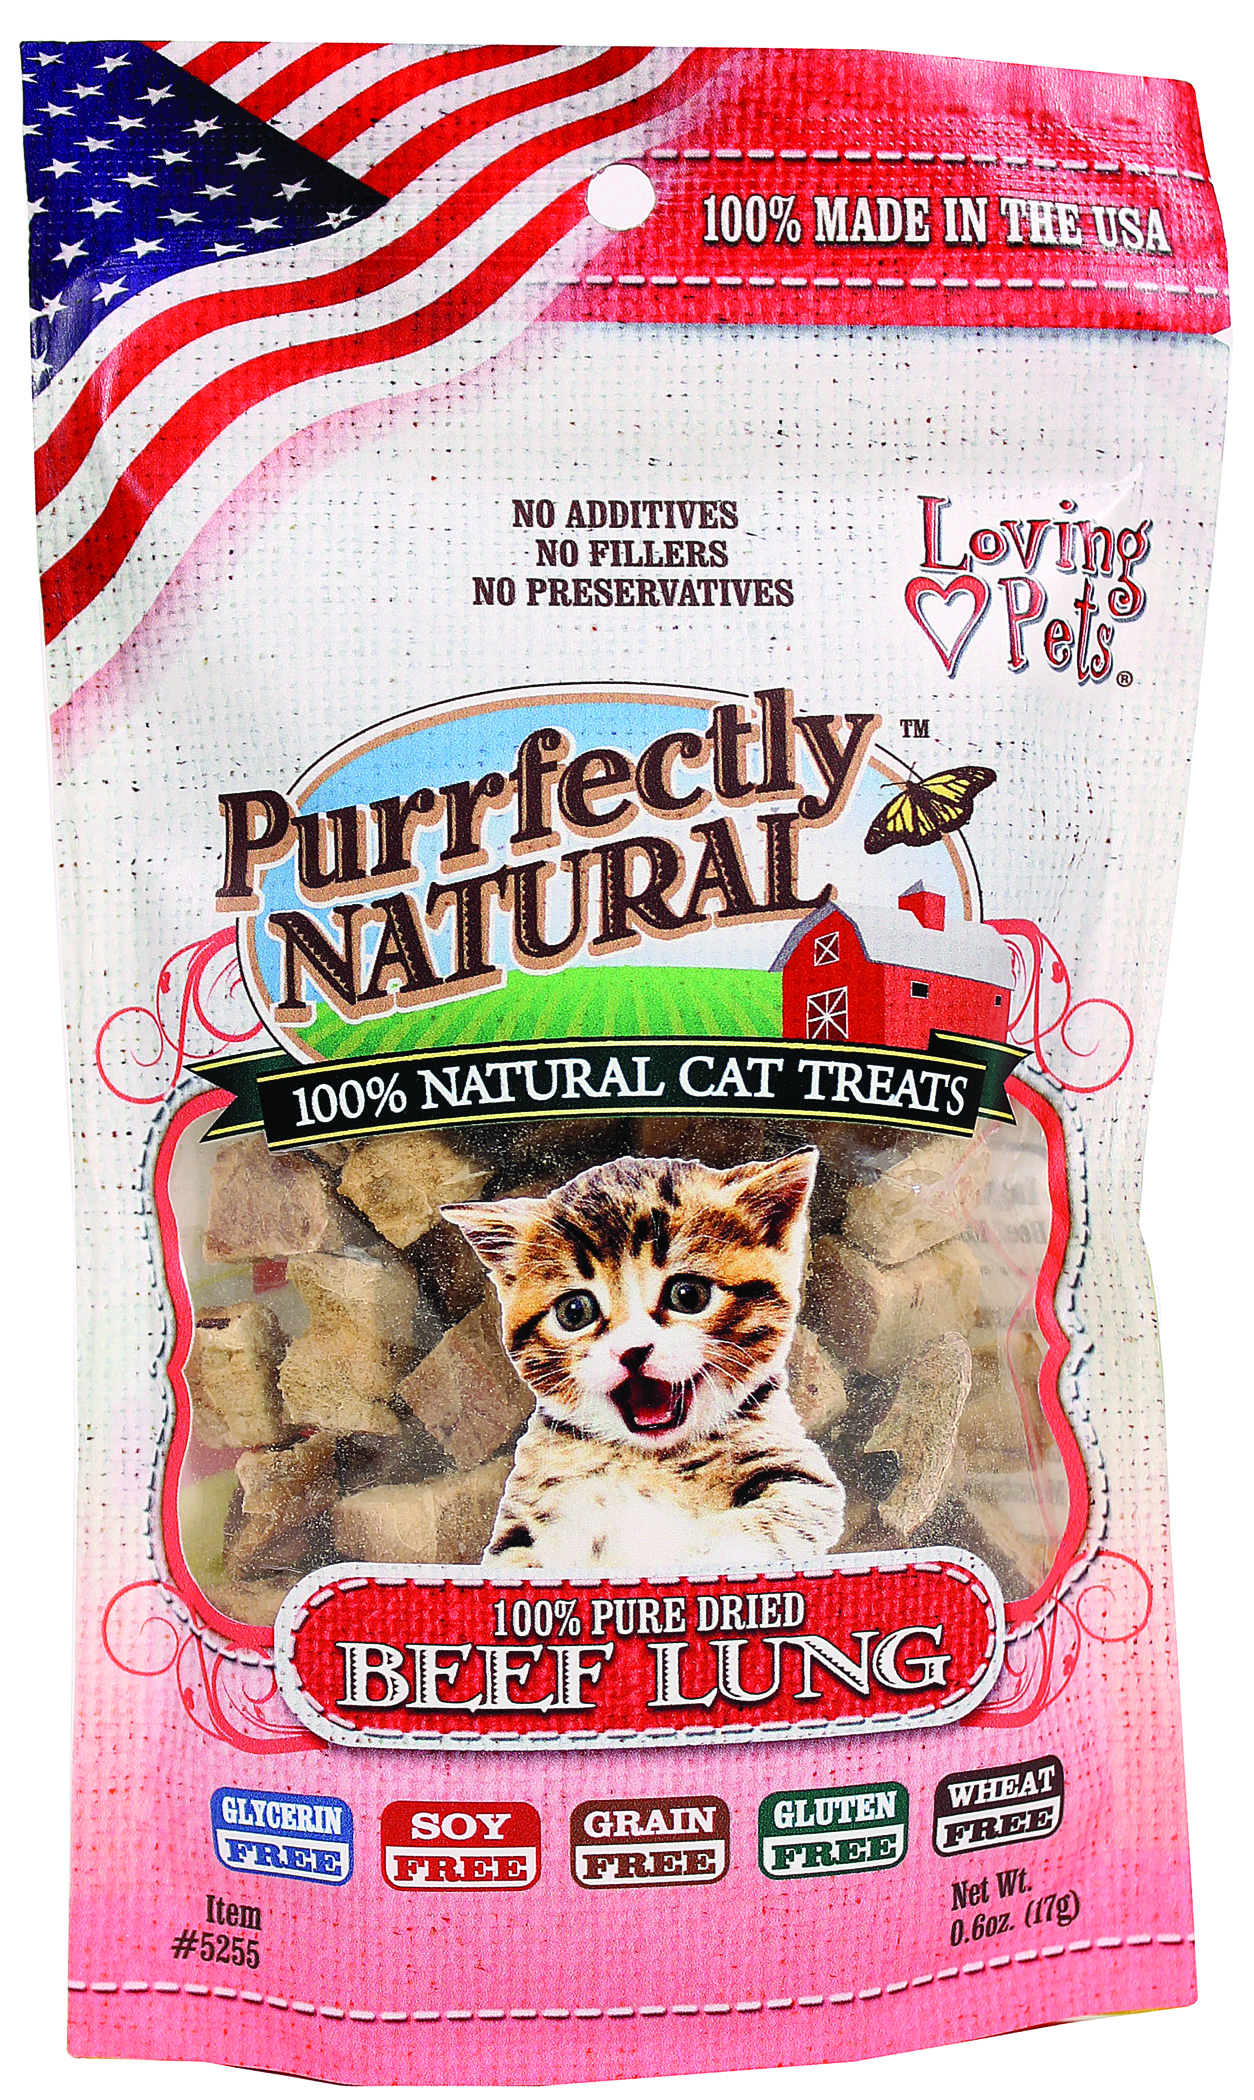 PURRFECTLY NATURAL CAT TREATS